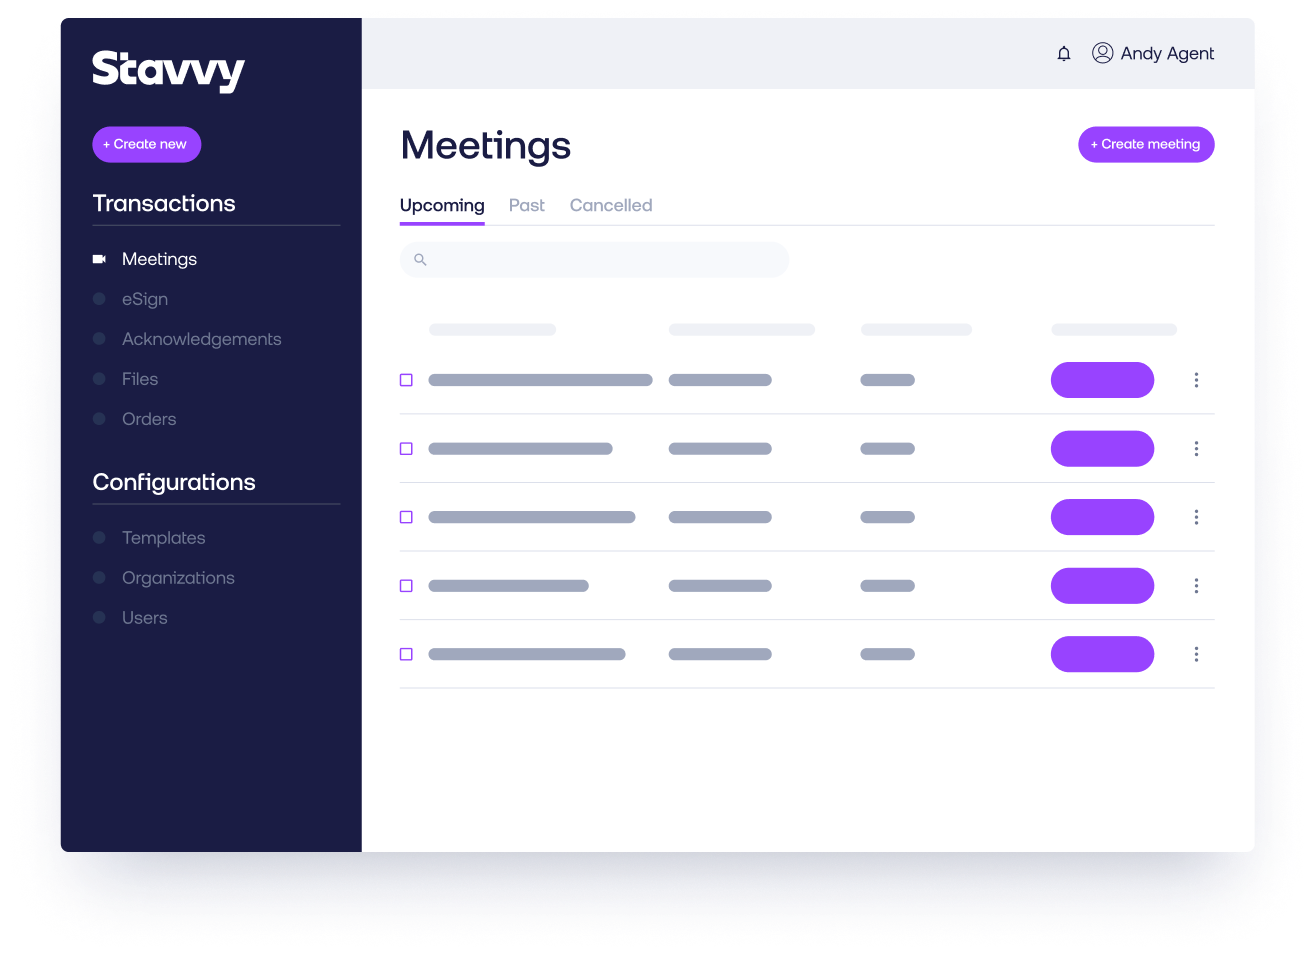 Image of the Scheduling Dashboard on the Stavvy platform